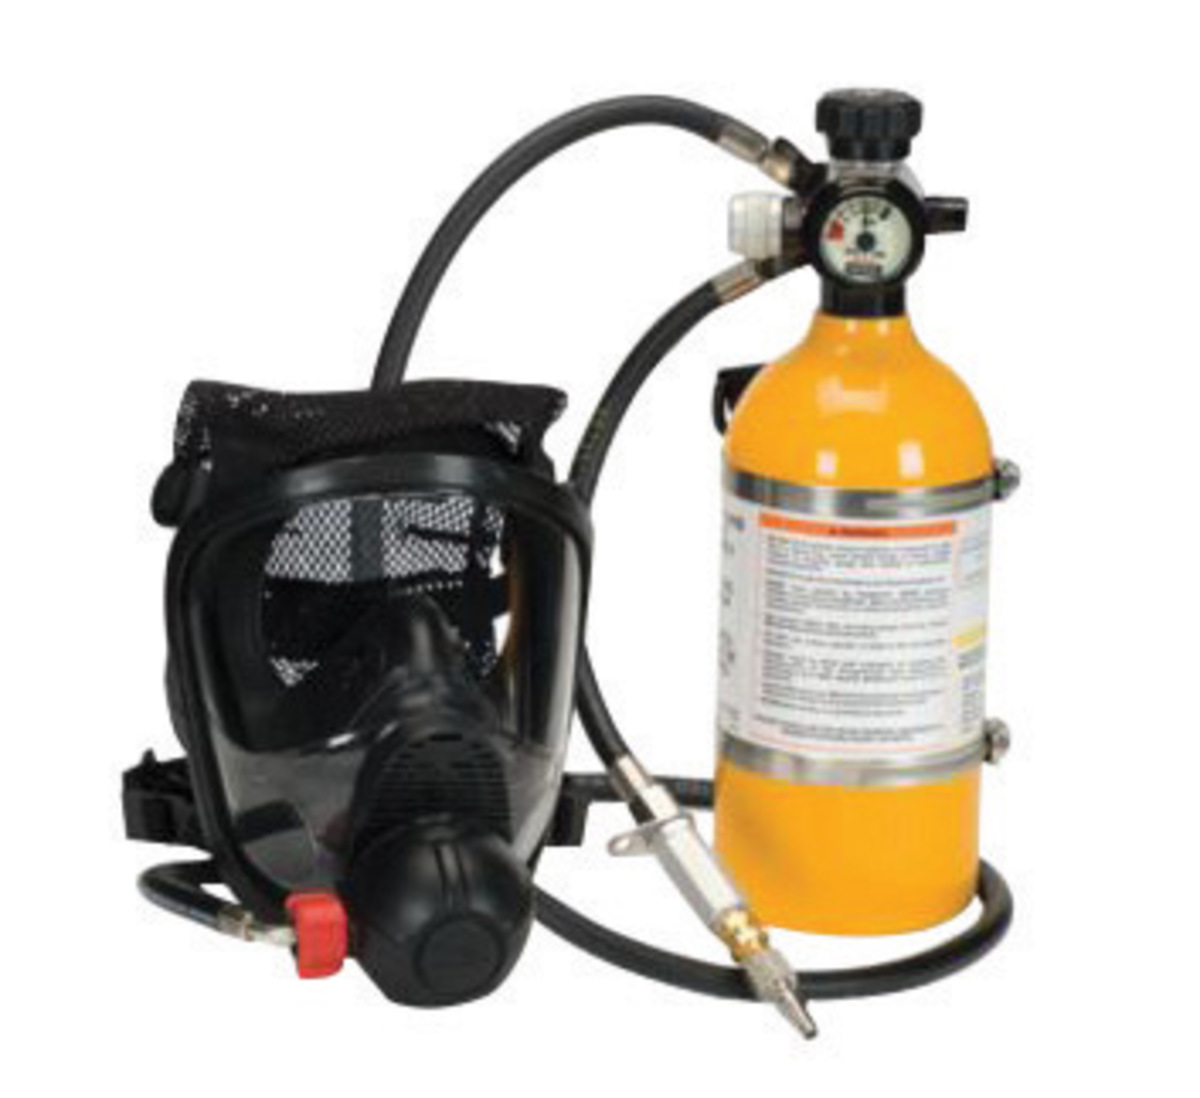 MSA Medium PremAire™ Cadet Series Full Face Air Purifying Respirator (Availability restrictions apply.)